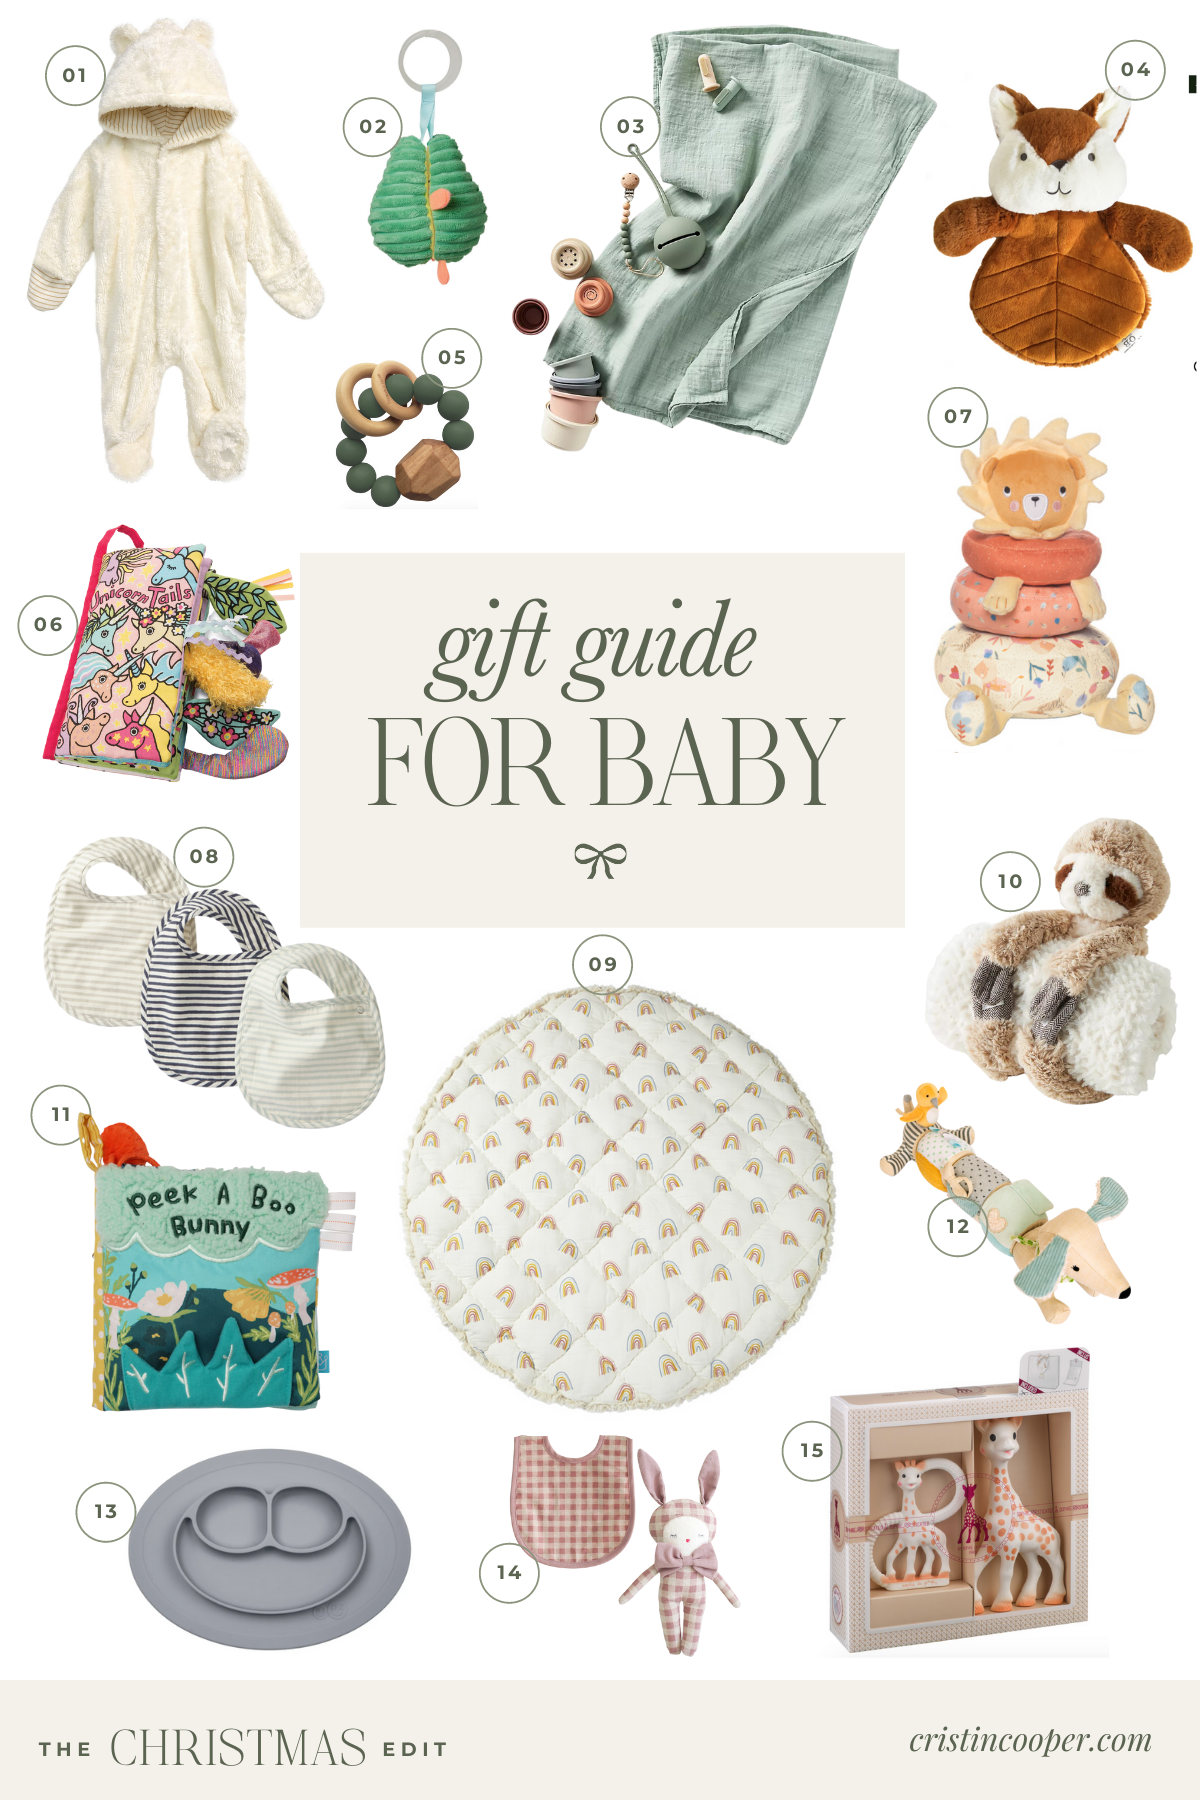 Gifts for baby